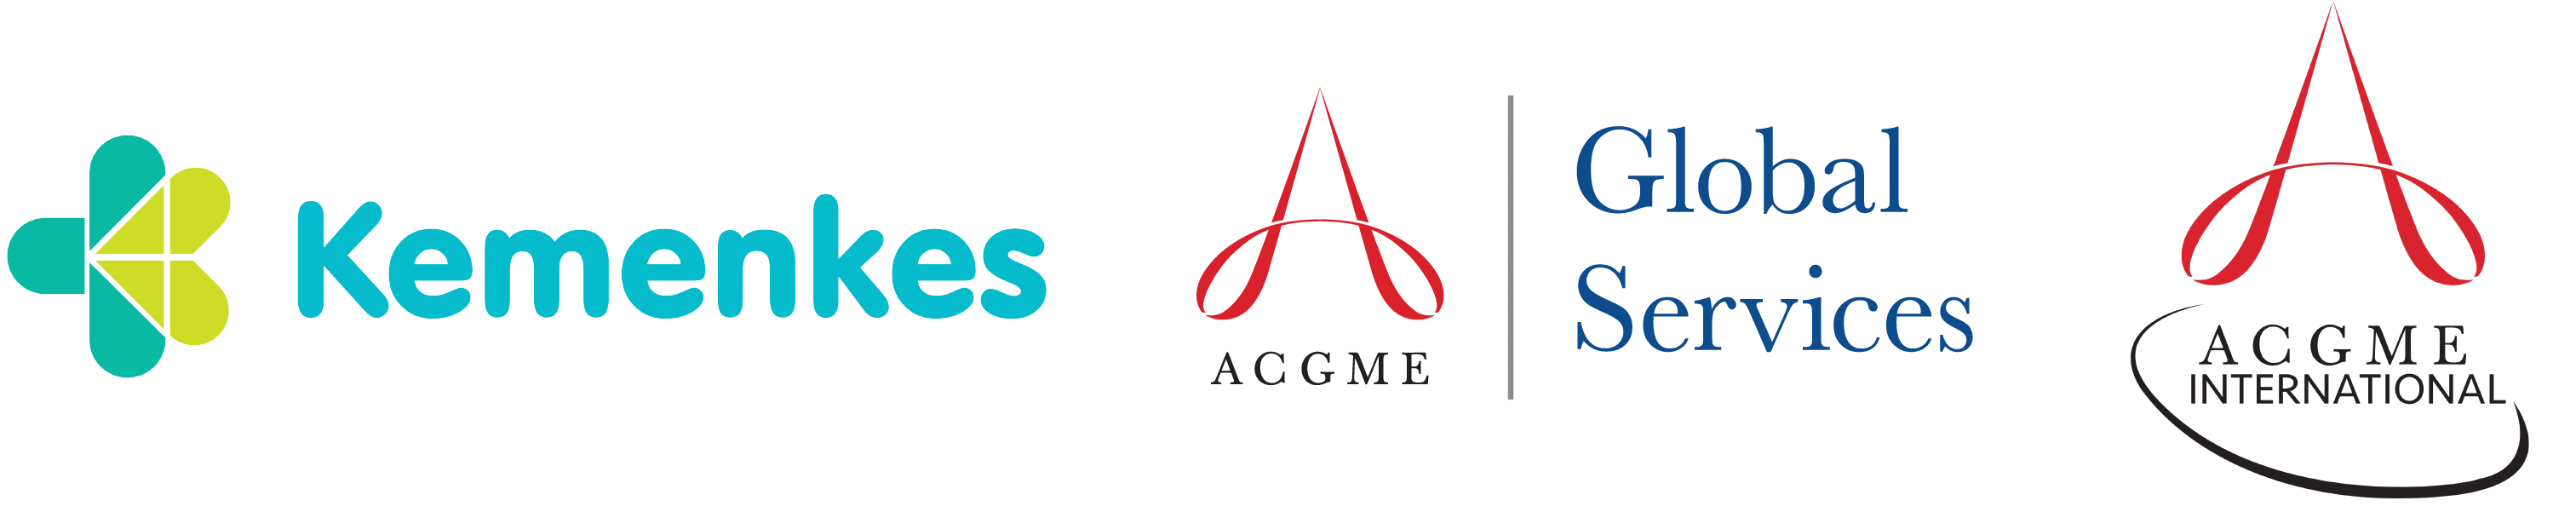 The ACGME and ACGME 